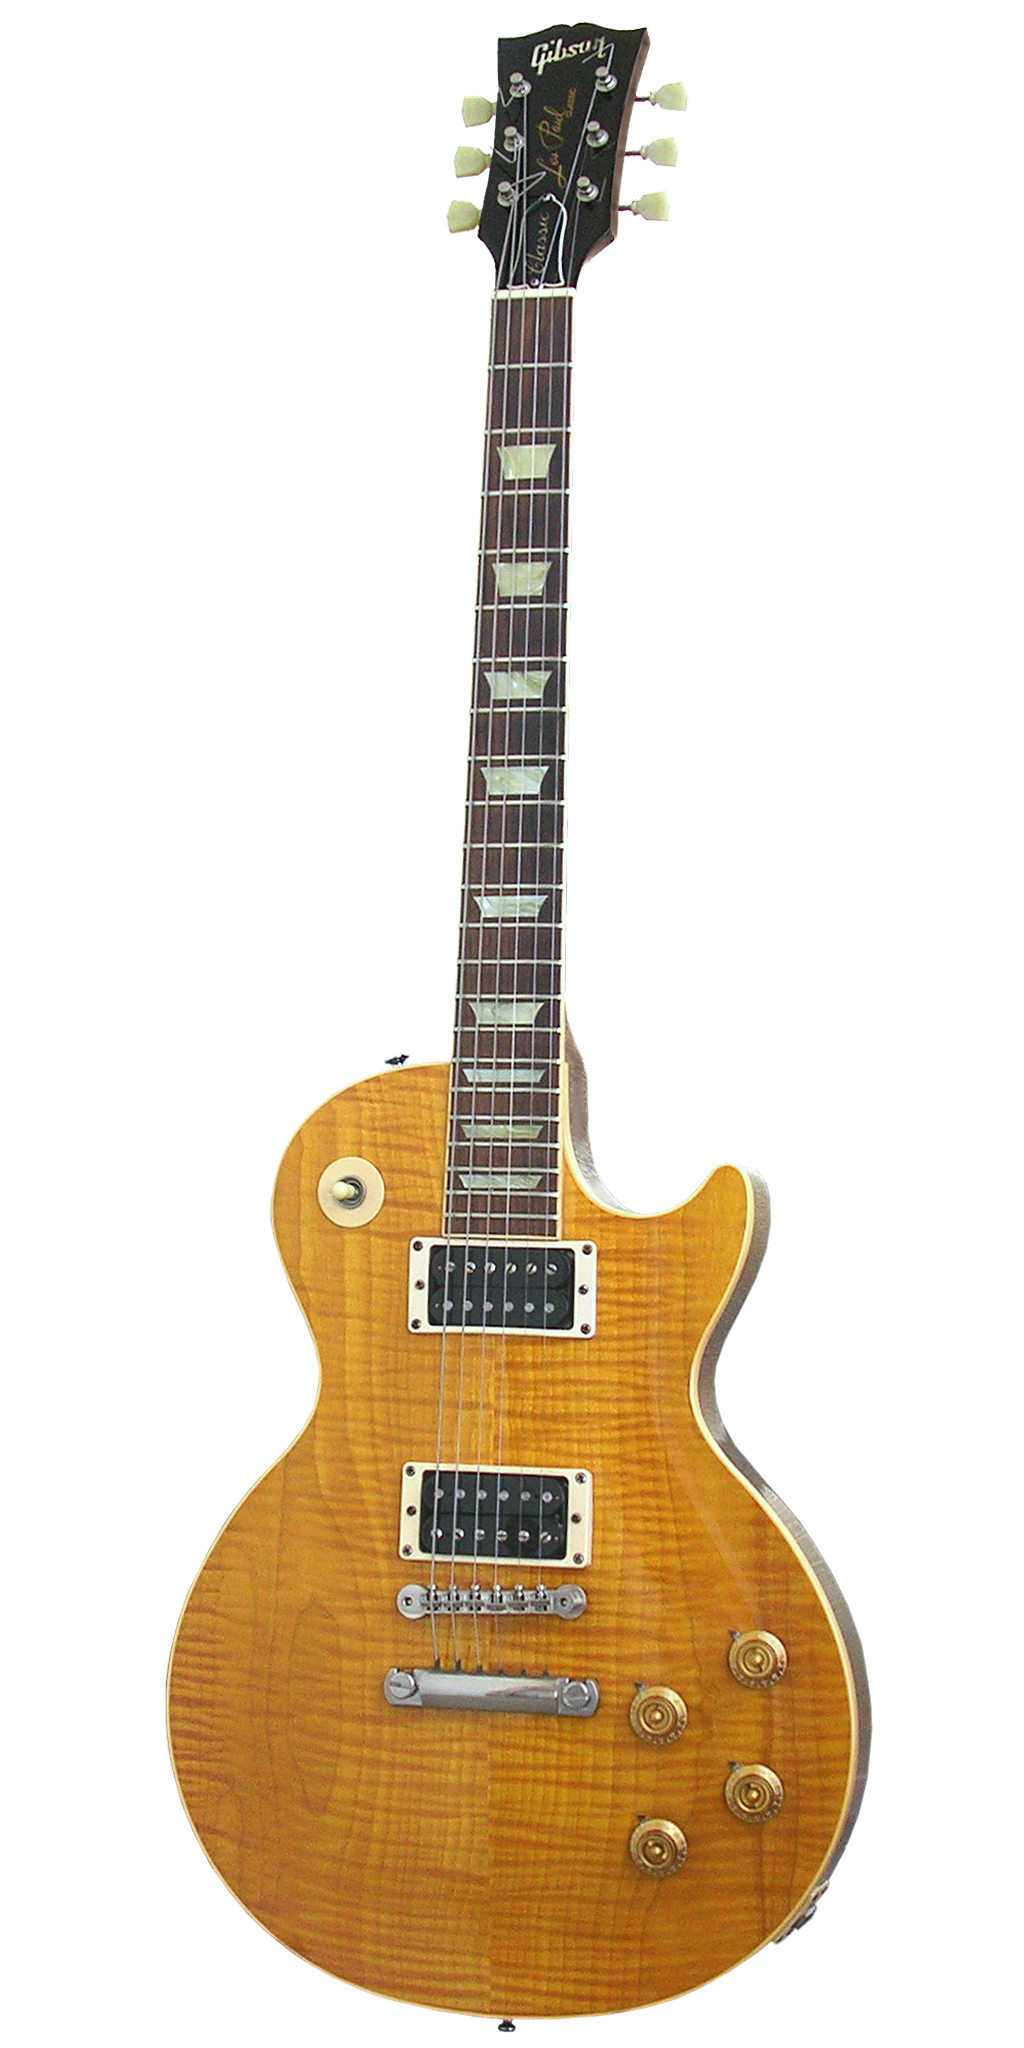 File:Gibson ES-175.png